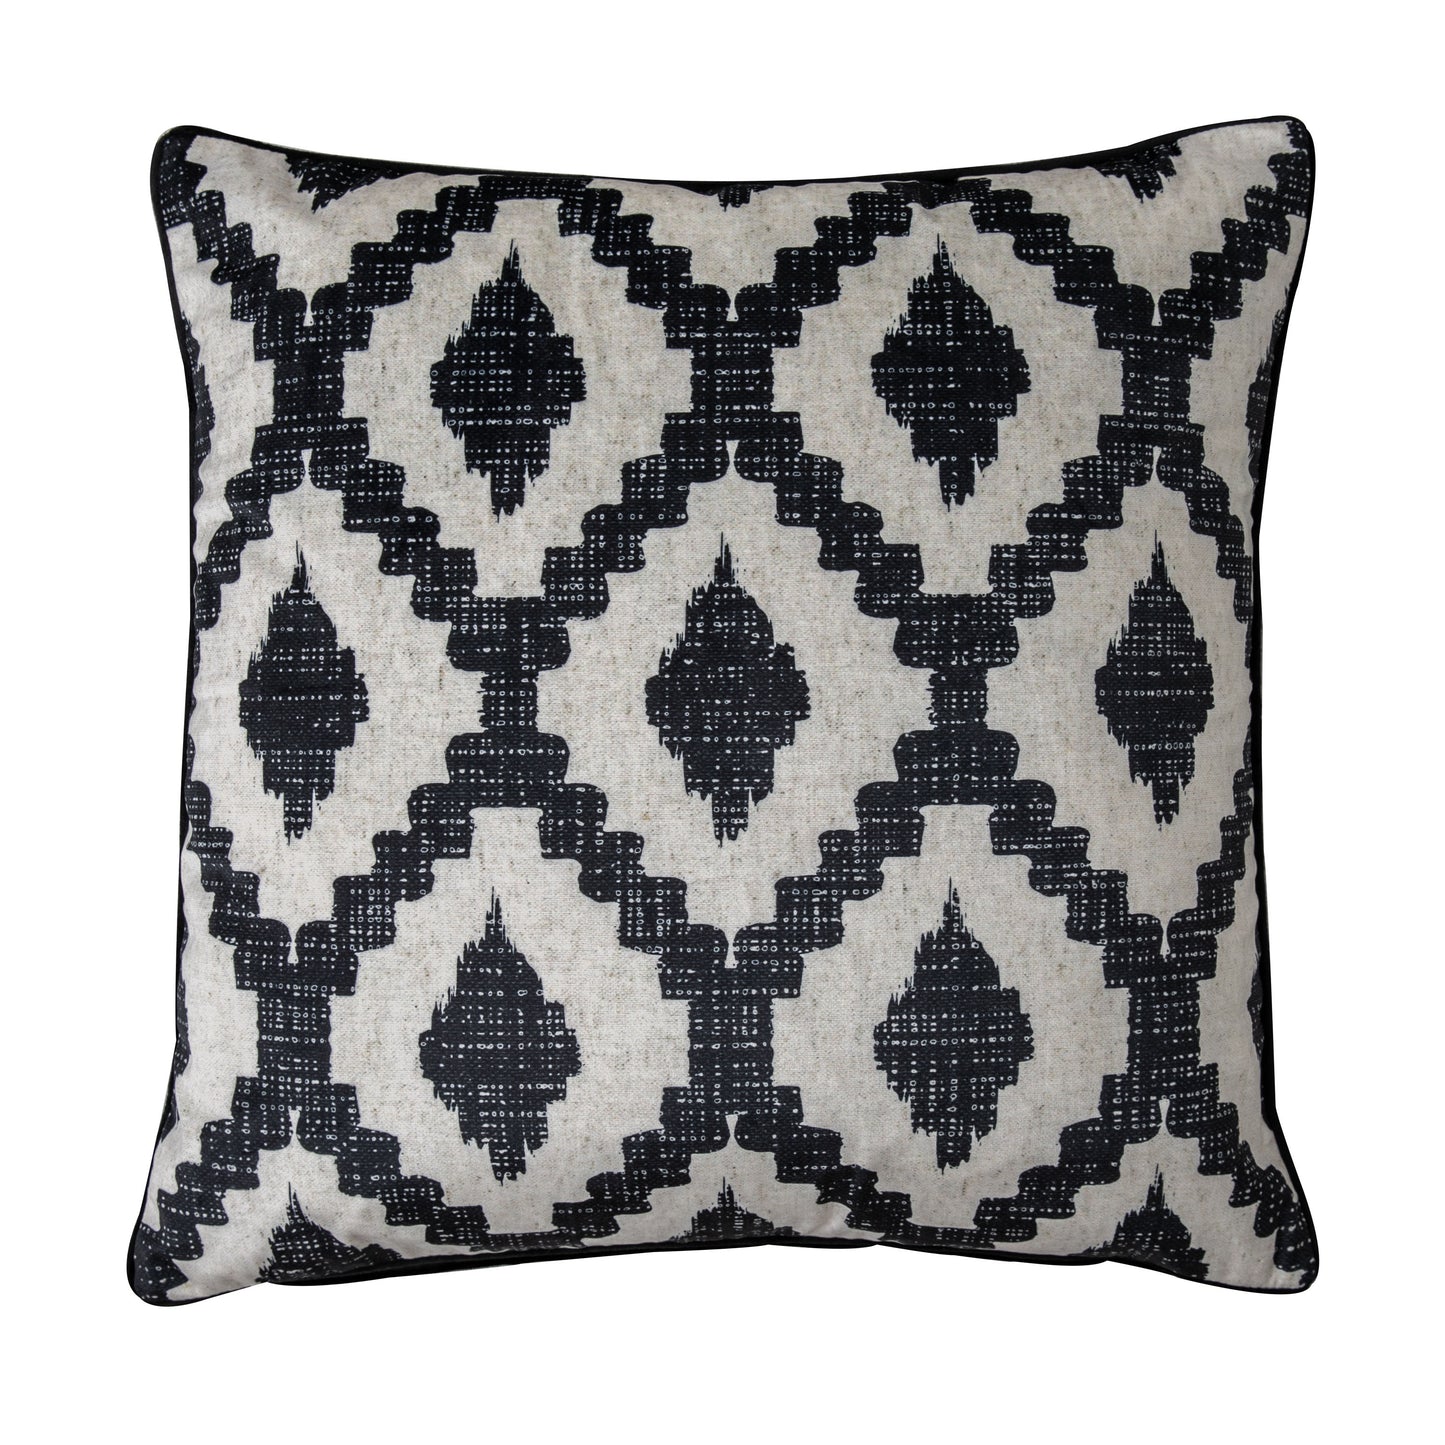 Load image into Gallery viewer, Assington Cushion Black / White 550x550mm with a black and white geometric pattern for home interior decor from Kikiathome.co.uk.
